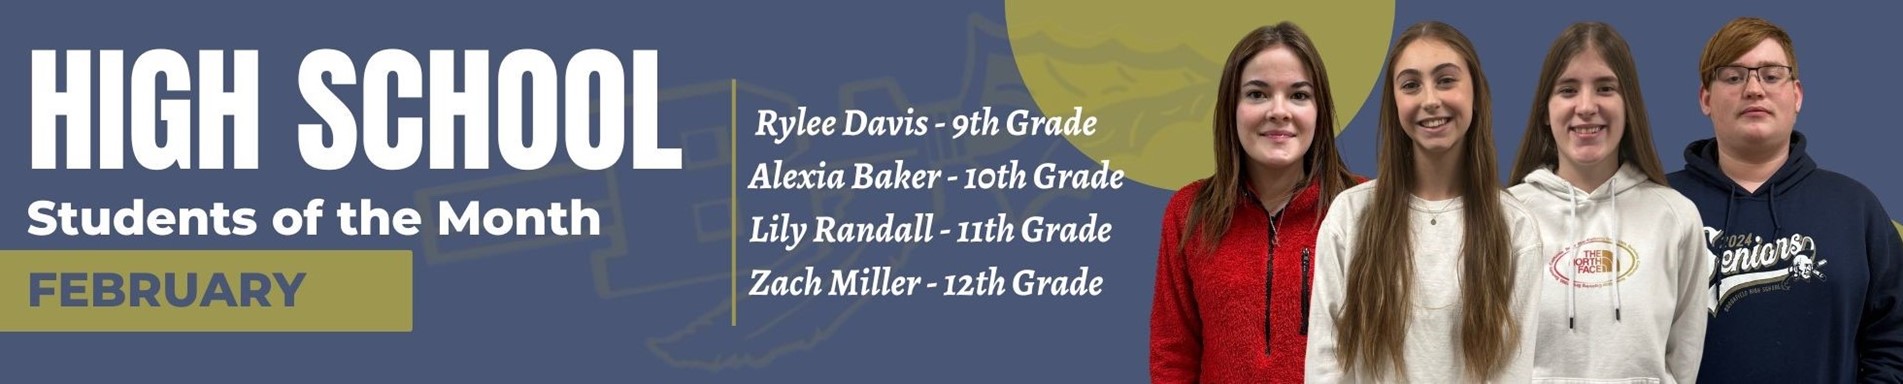 BHS Students of the Month - February 